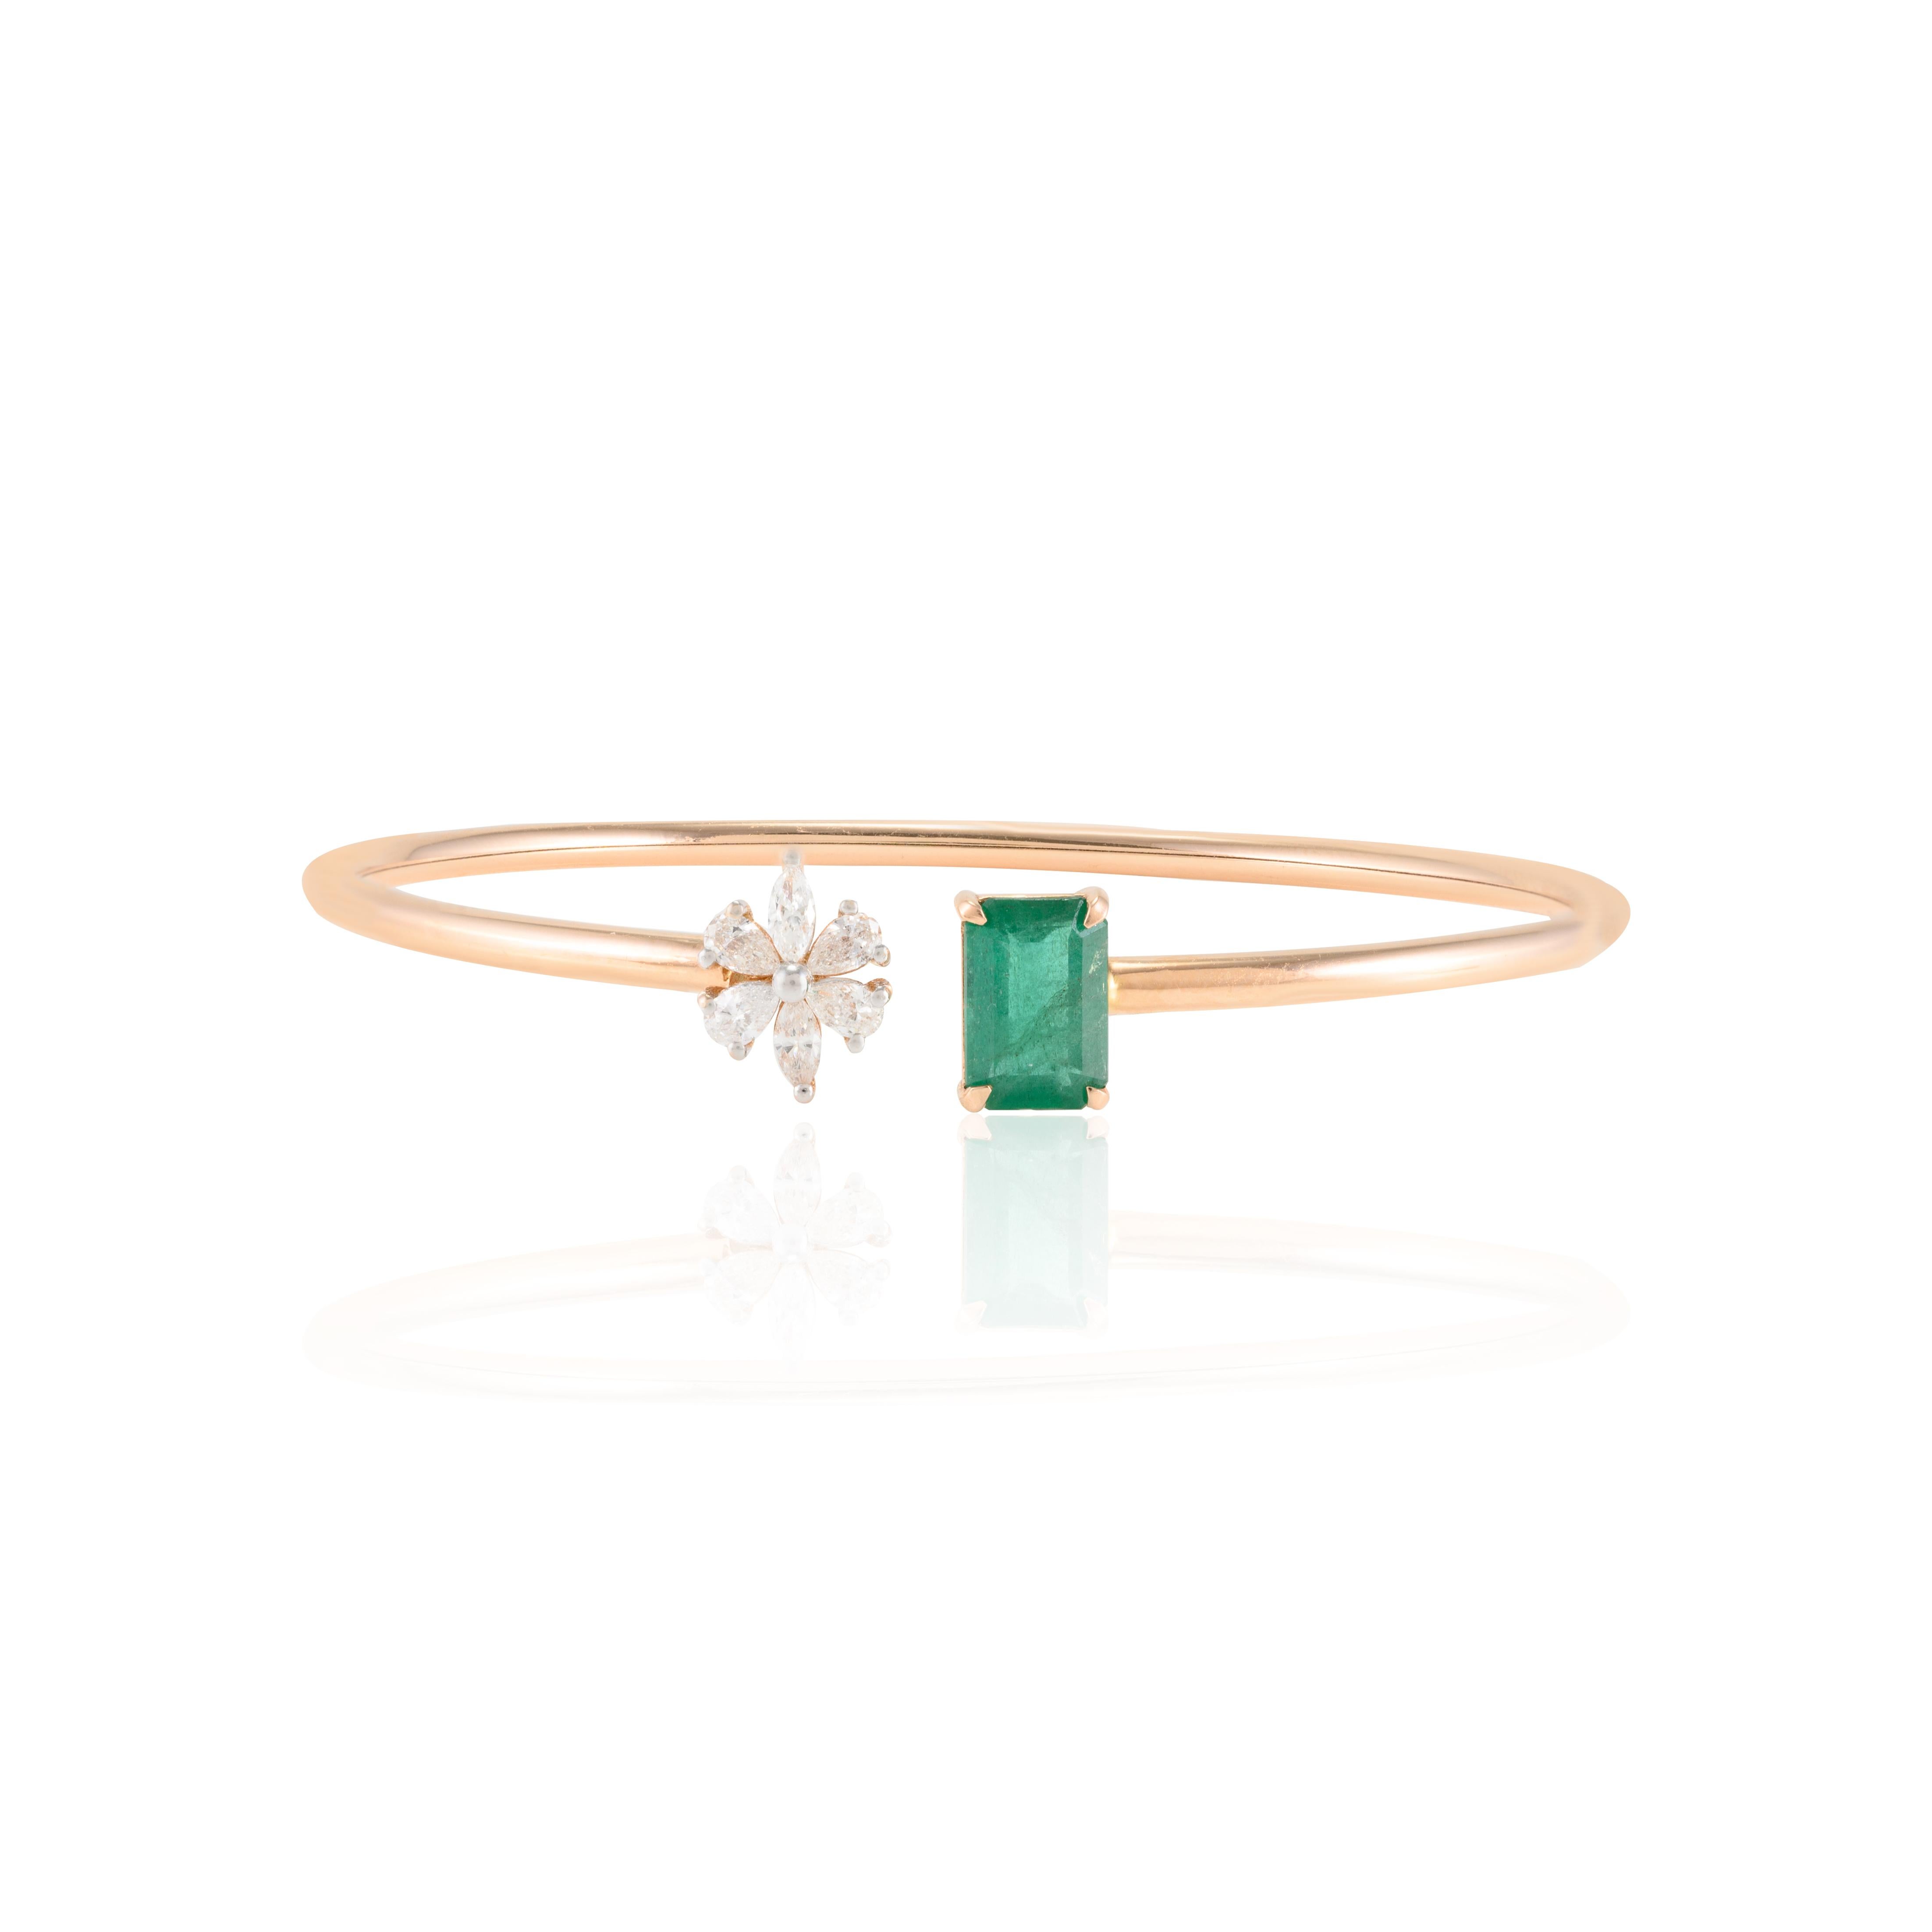 This Natural Emerald and Diamond Tip Cuff Bracelet in 18K gold showcases endlessly sparkling natural emerald, weighing 1.31 carat and diamonds weighing 0.37 carat. It is adjustable in length. 
Emerald enhances intellectual capacity of the